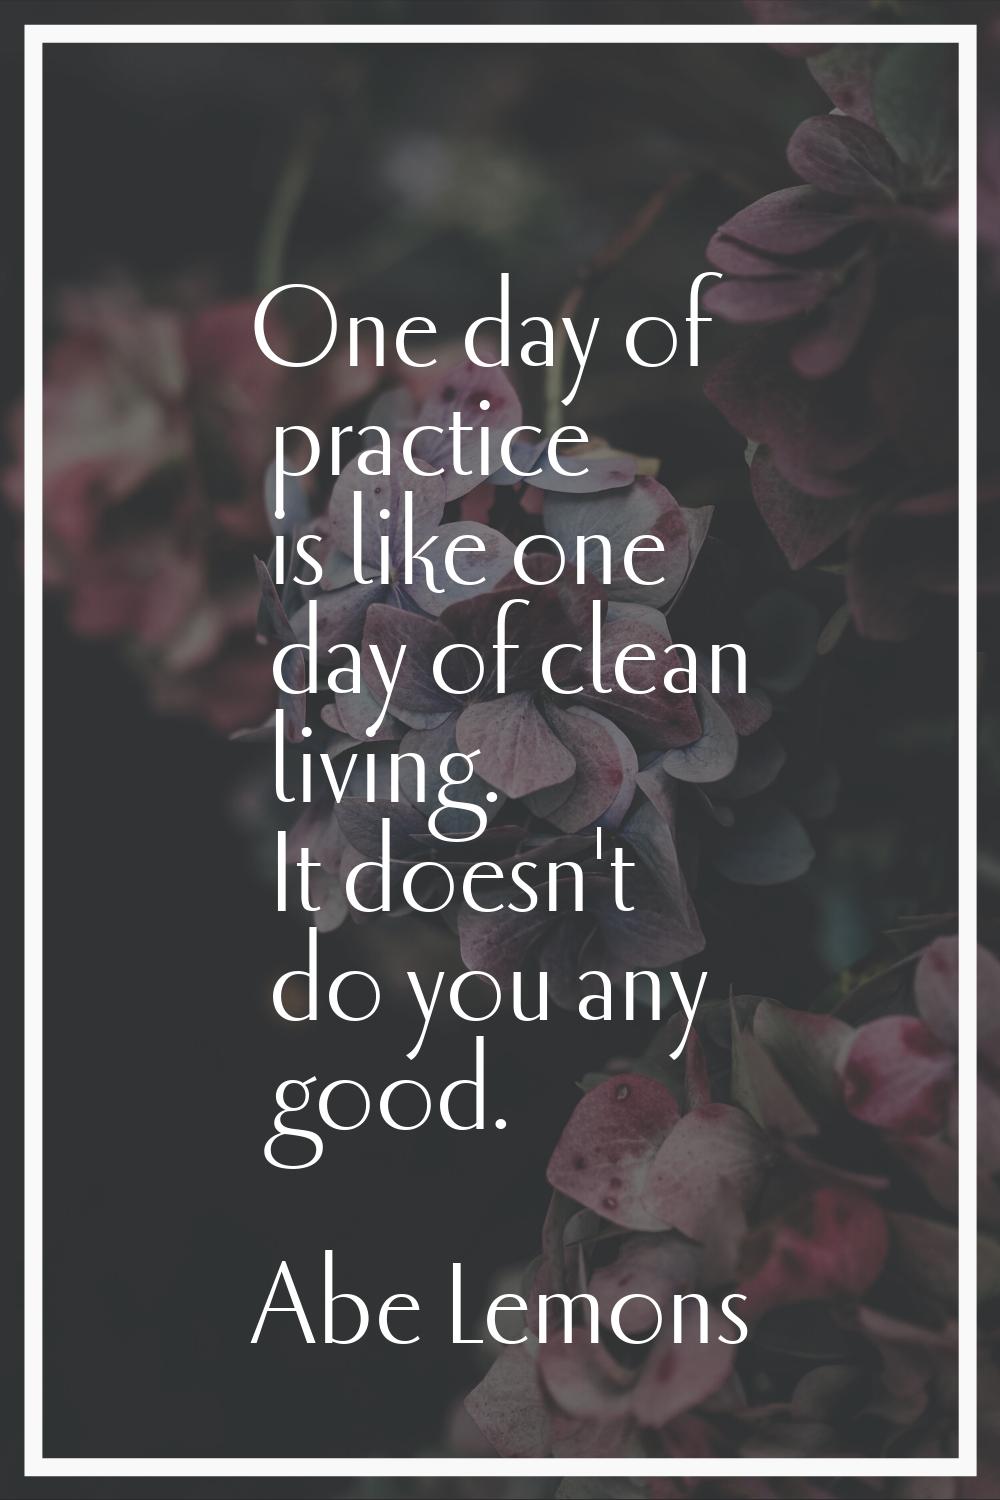 One day of practice is like one day of clean living. It doesn't do you any good.